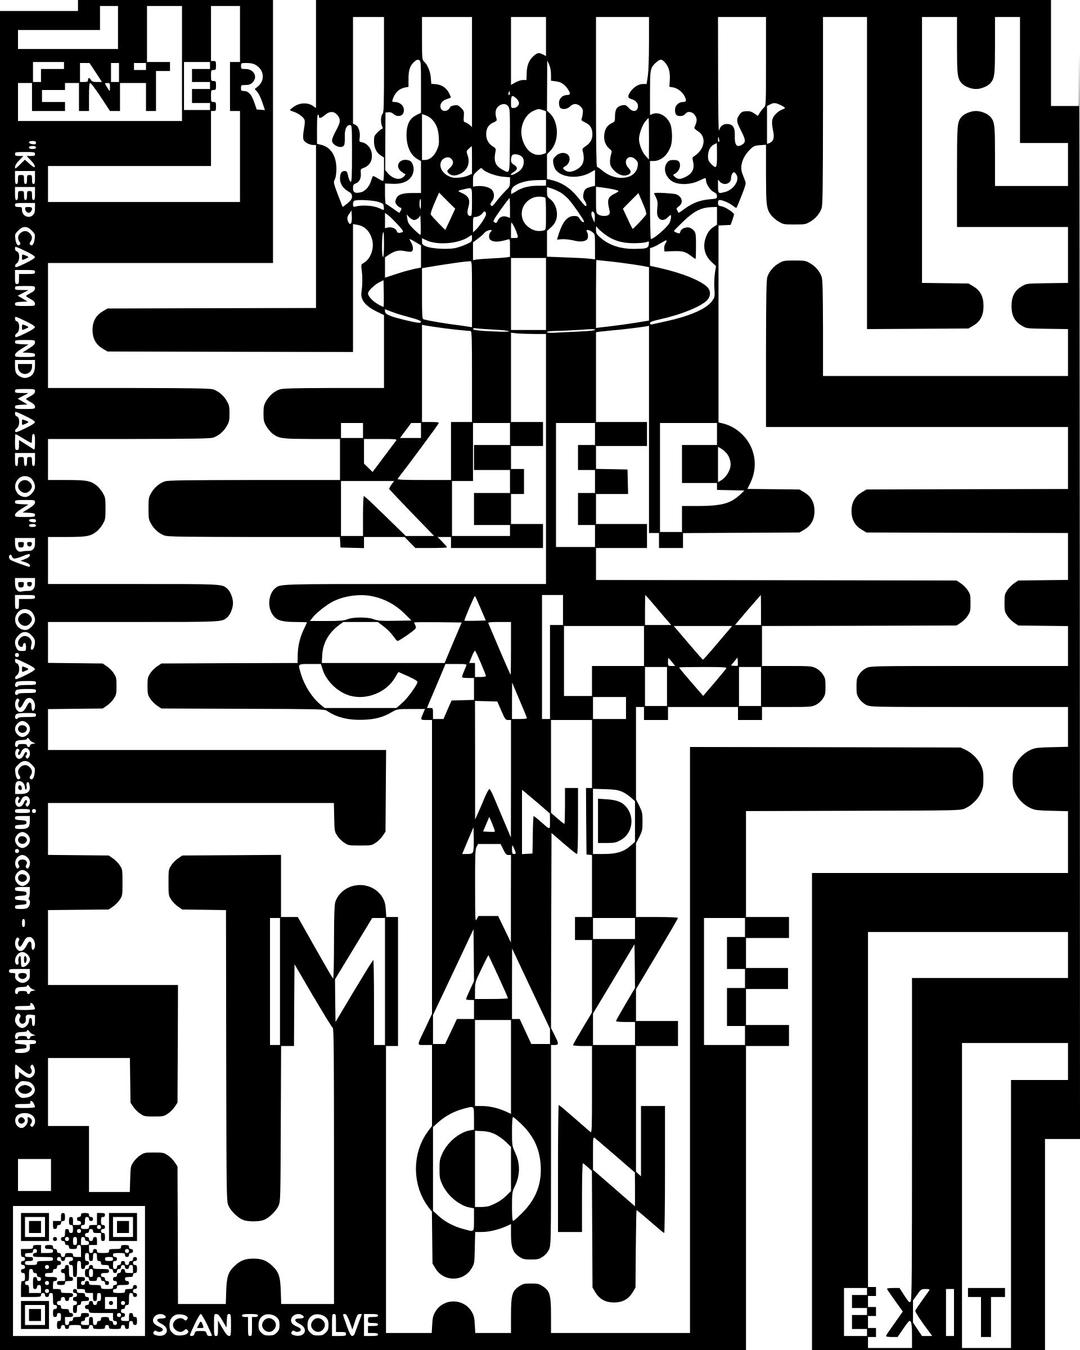 Keep Calm and Maze On png transparent